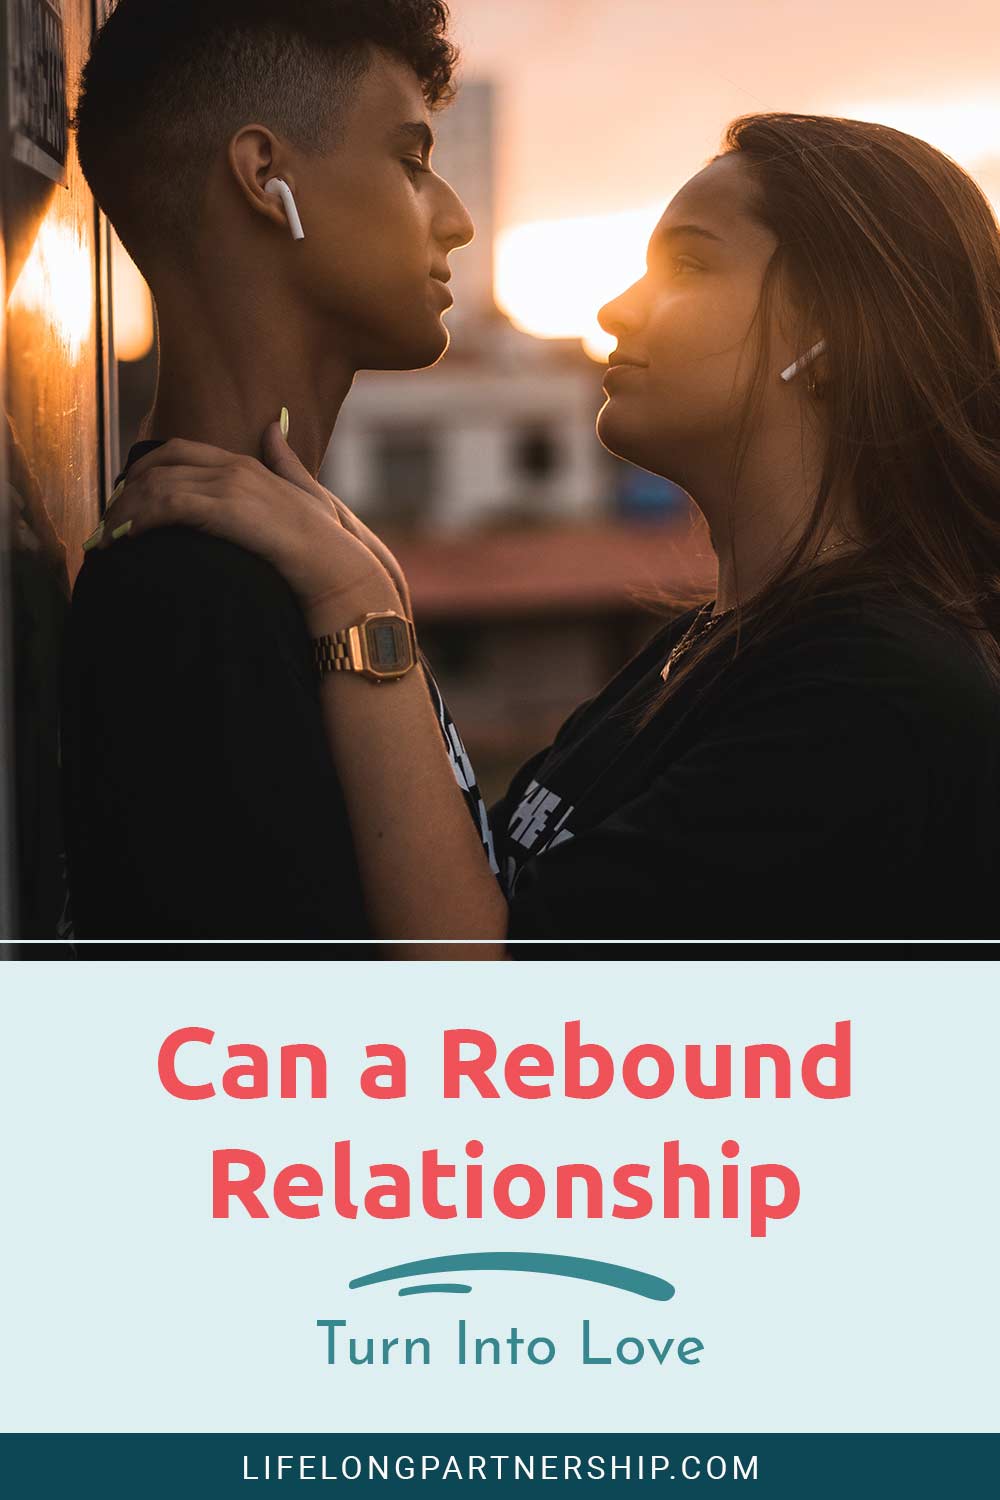 Can a Rebound Relationship Turn Into Love